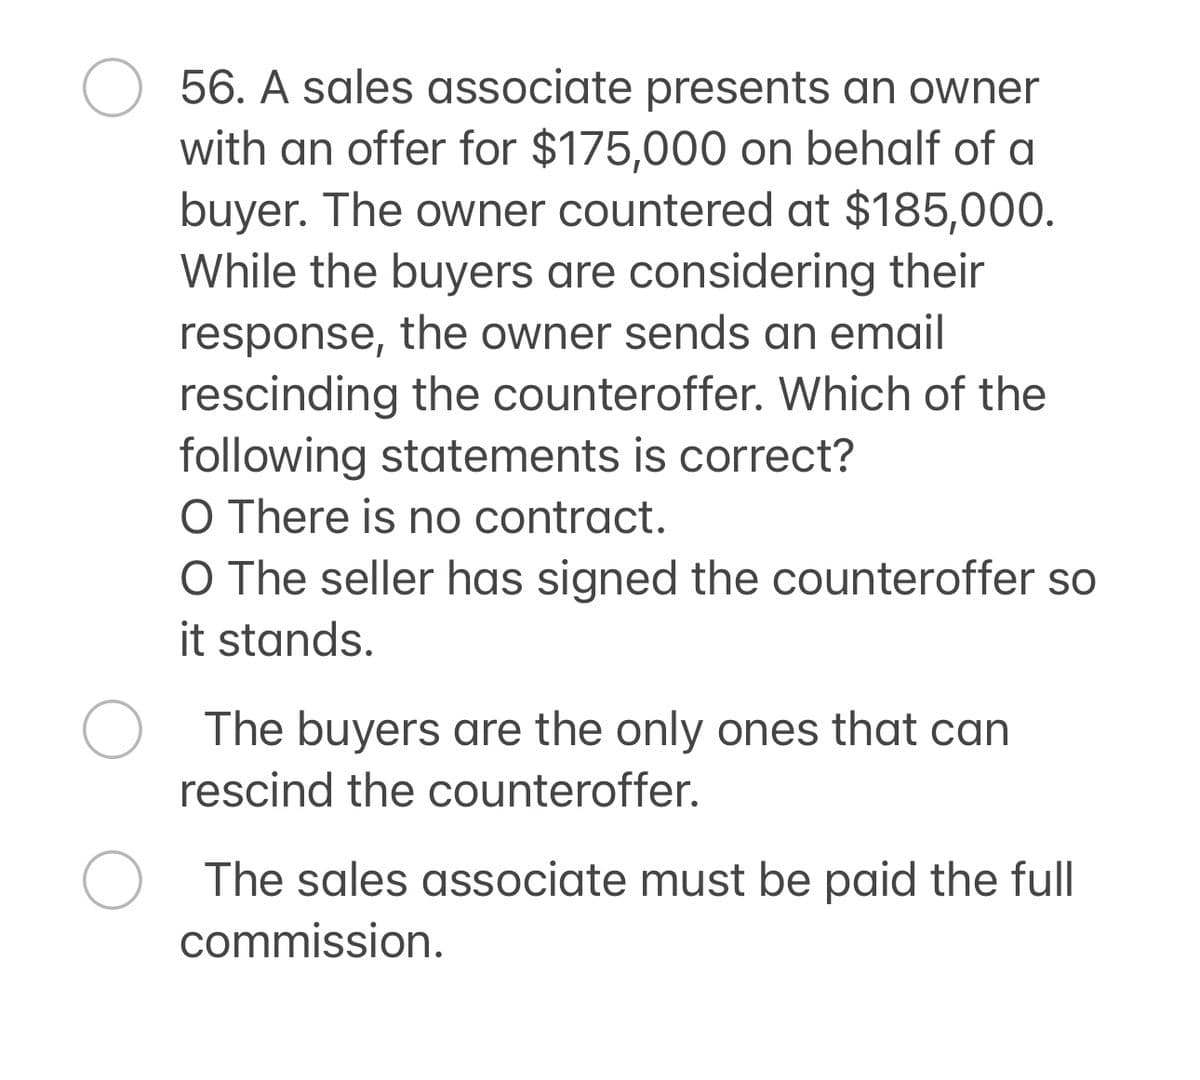 56. A sales associate presents an owner
with an offer for $175,000 on behalf of a
buyer. The owner countered at $185,000.
While the buyers are considering their
response, the owner sends an email
rescinding the counteroffer. Which of the
following statements is correct?
O There is no contract.
O The seller has signed the counteroffer so
it stands.
The buyers are the only ones that can
rescind the counteroffer.
О The sales associate must be paid the full
commission.